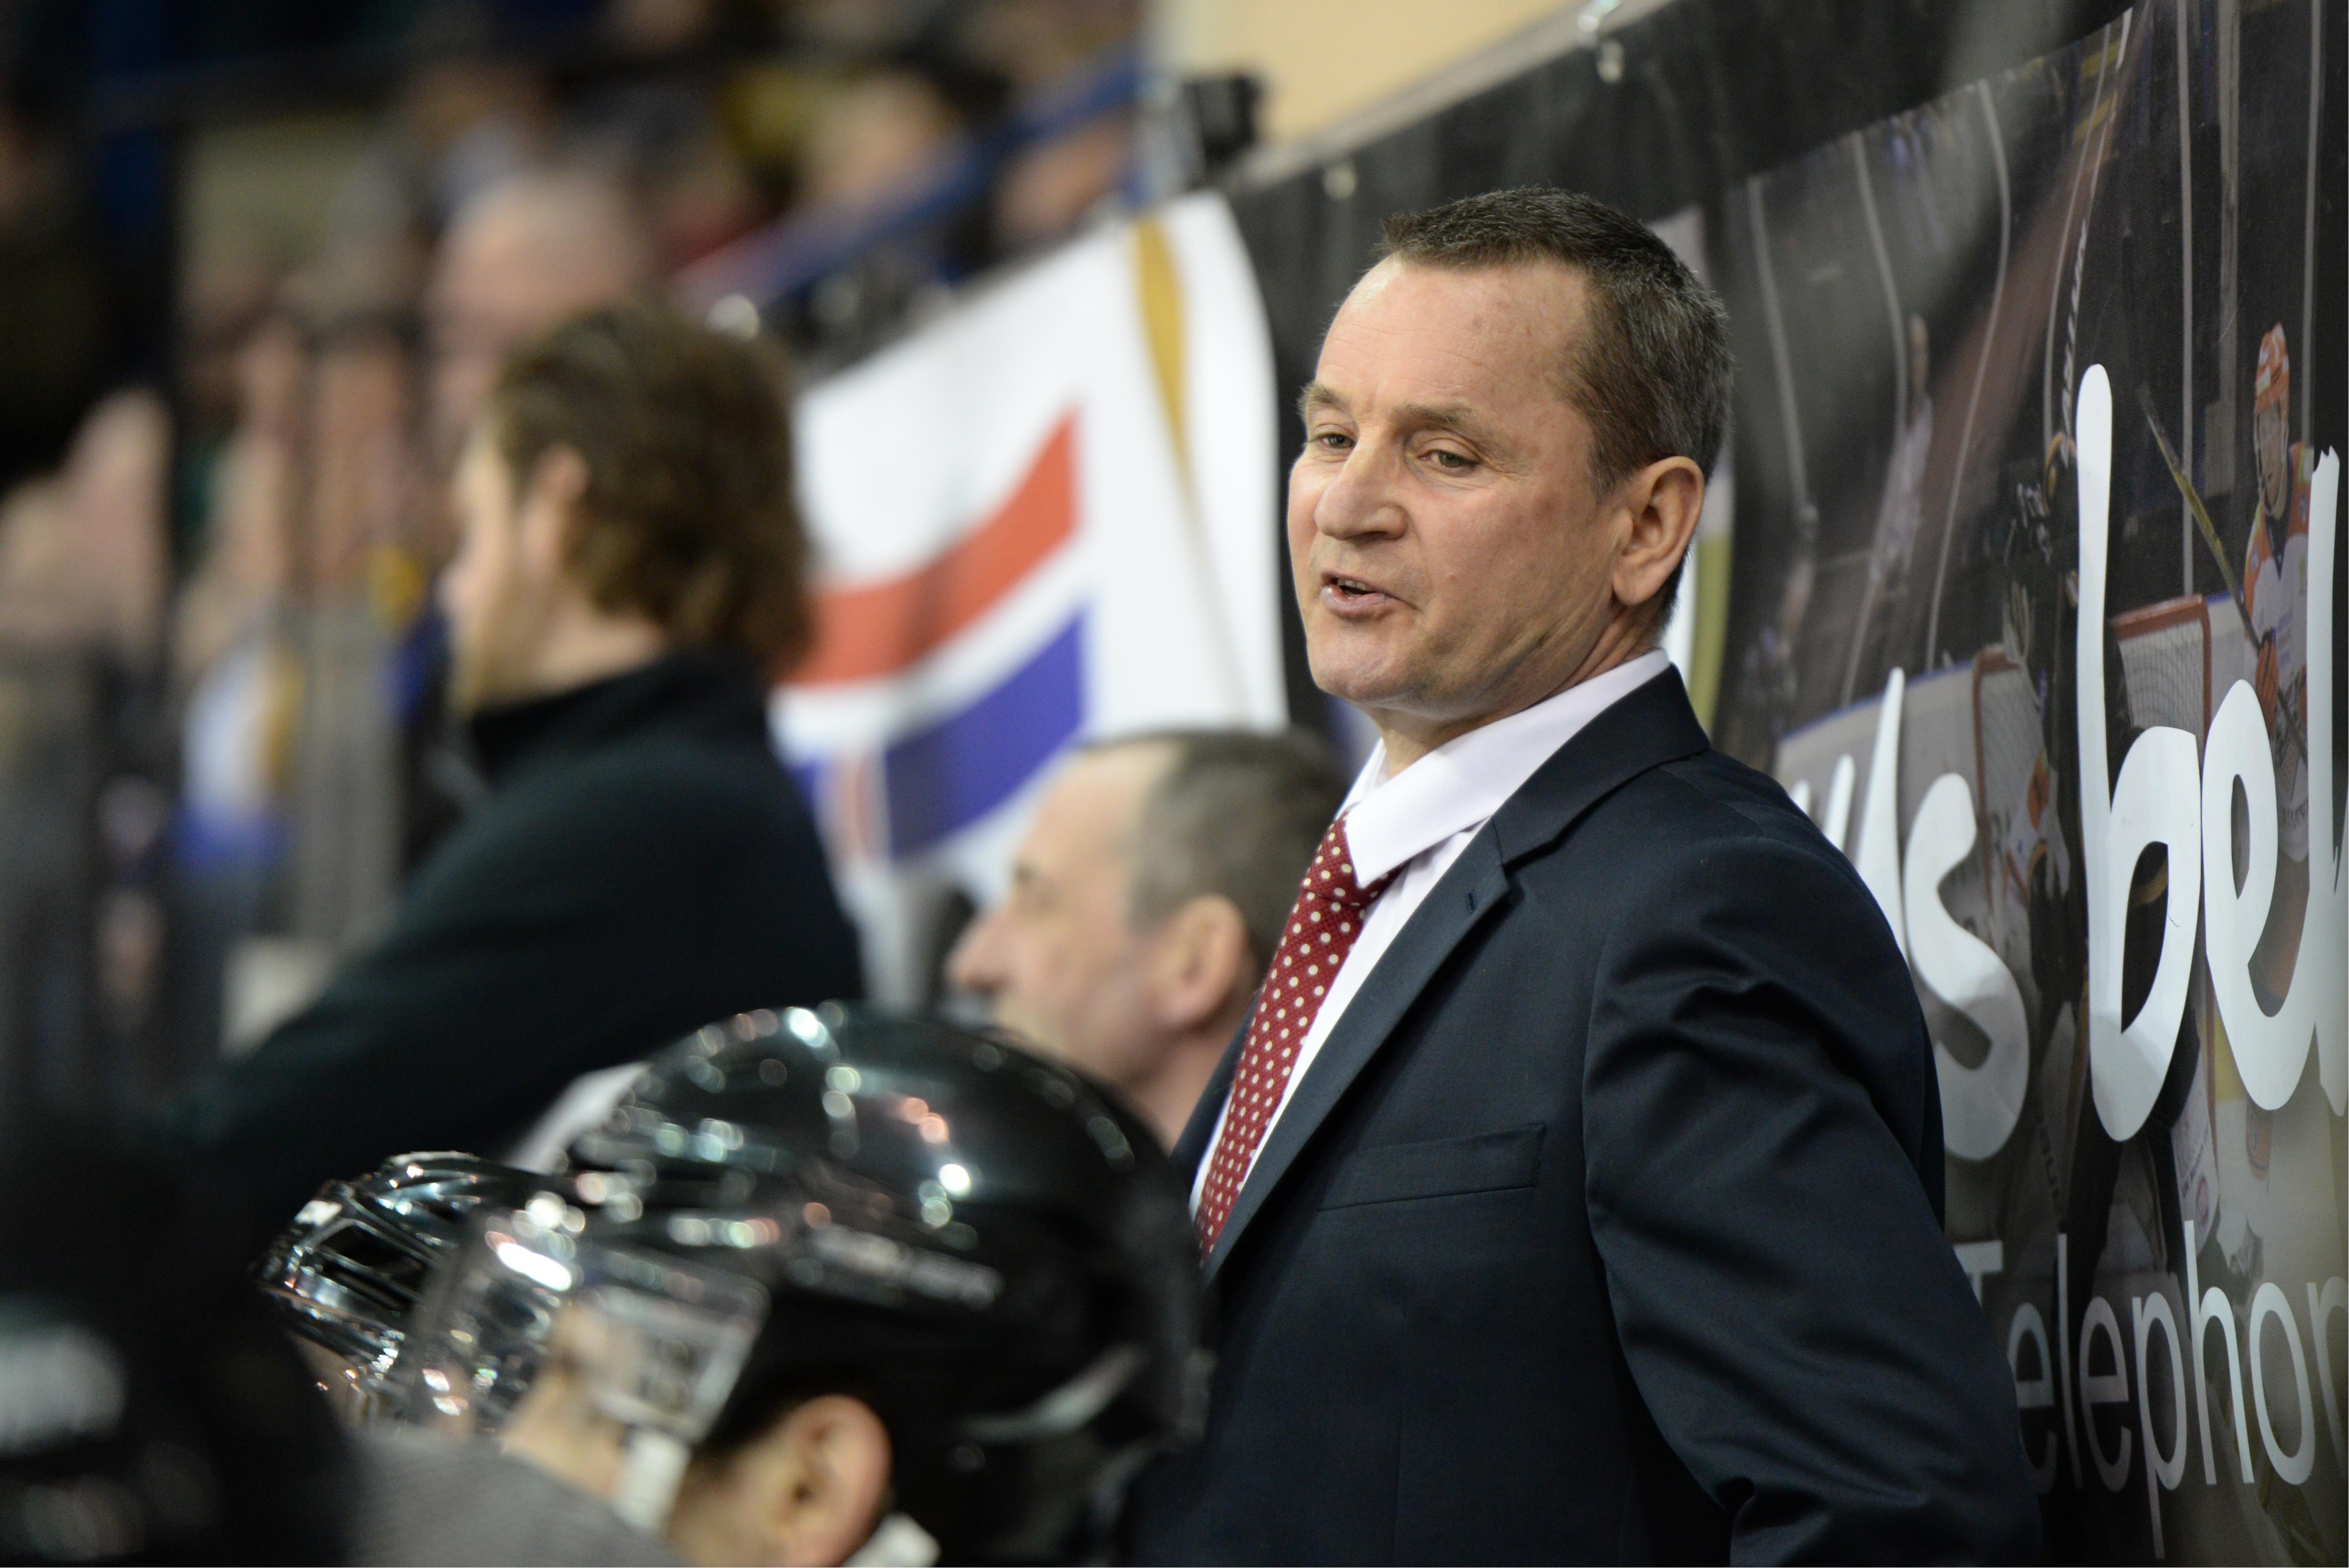 STRACHAN RETURNS TO PANTHERS AS ASSISTANT COACH Top Image